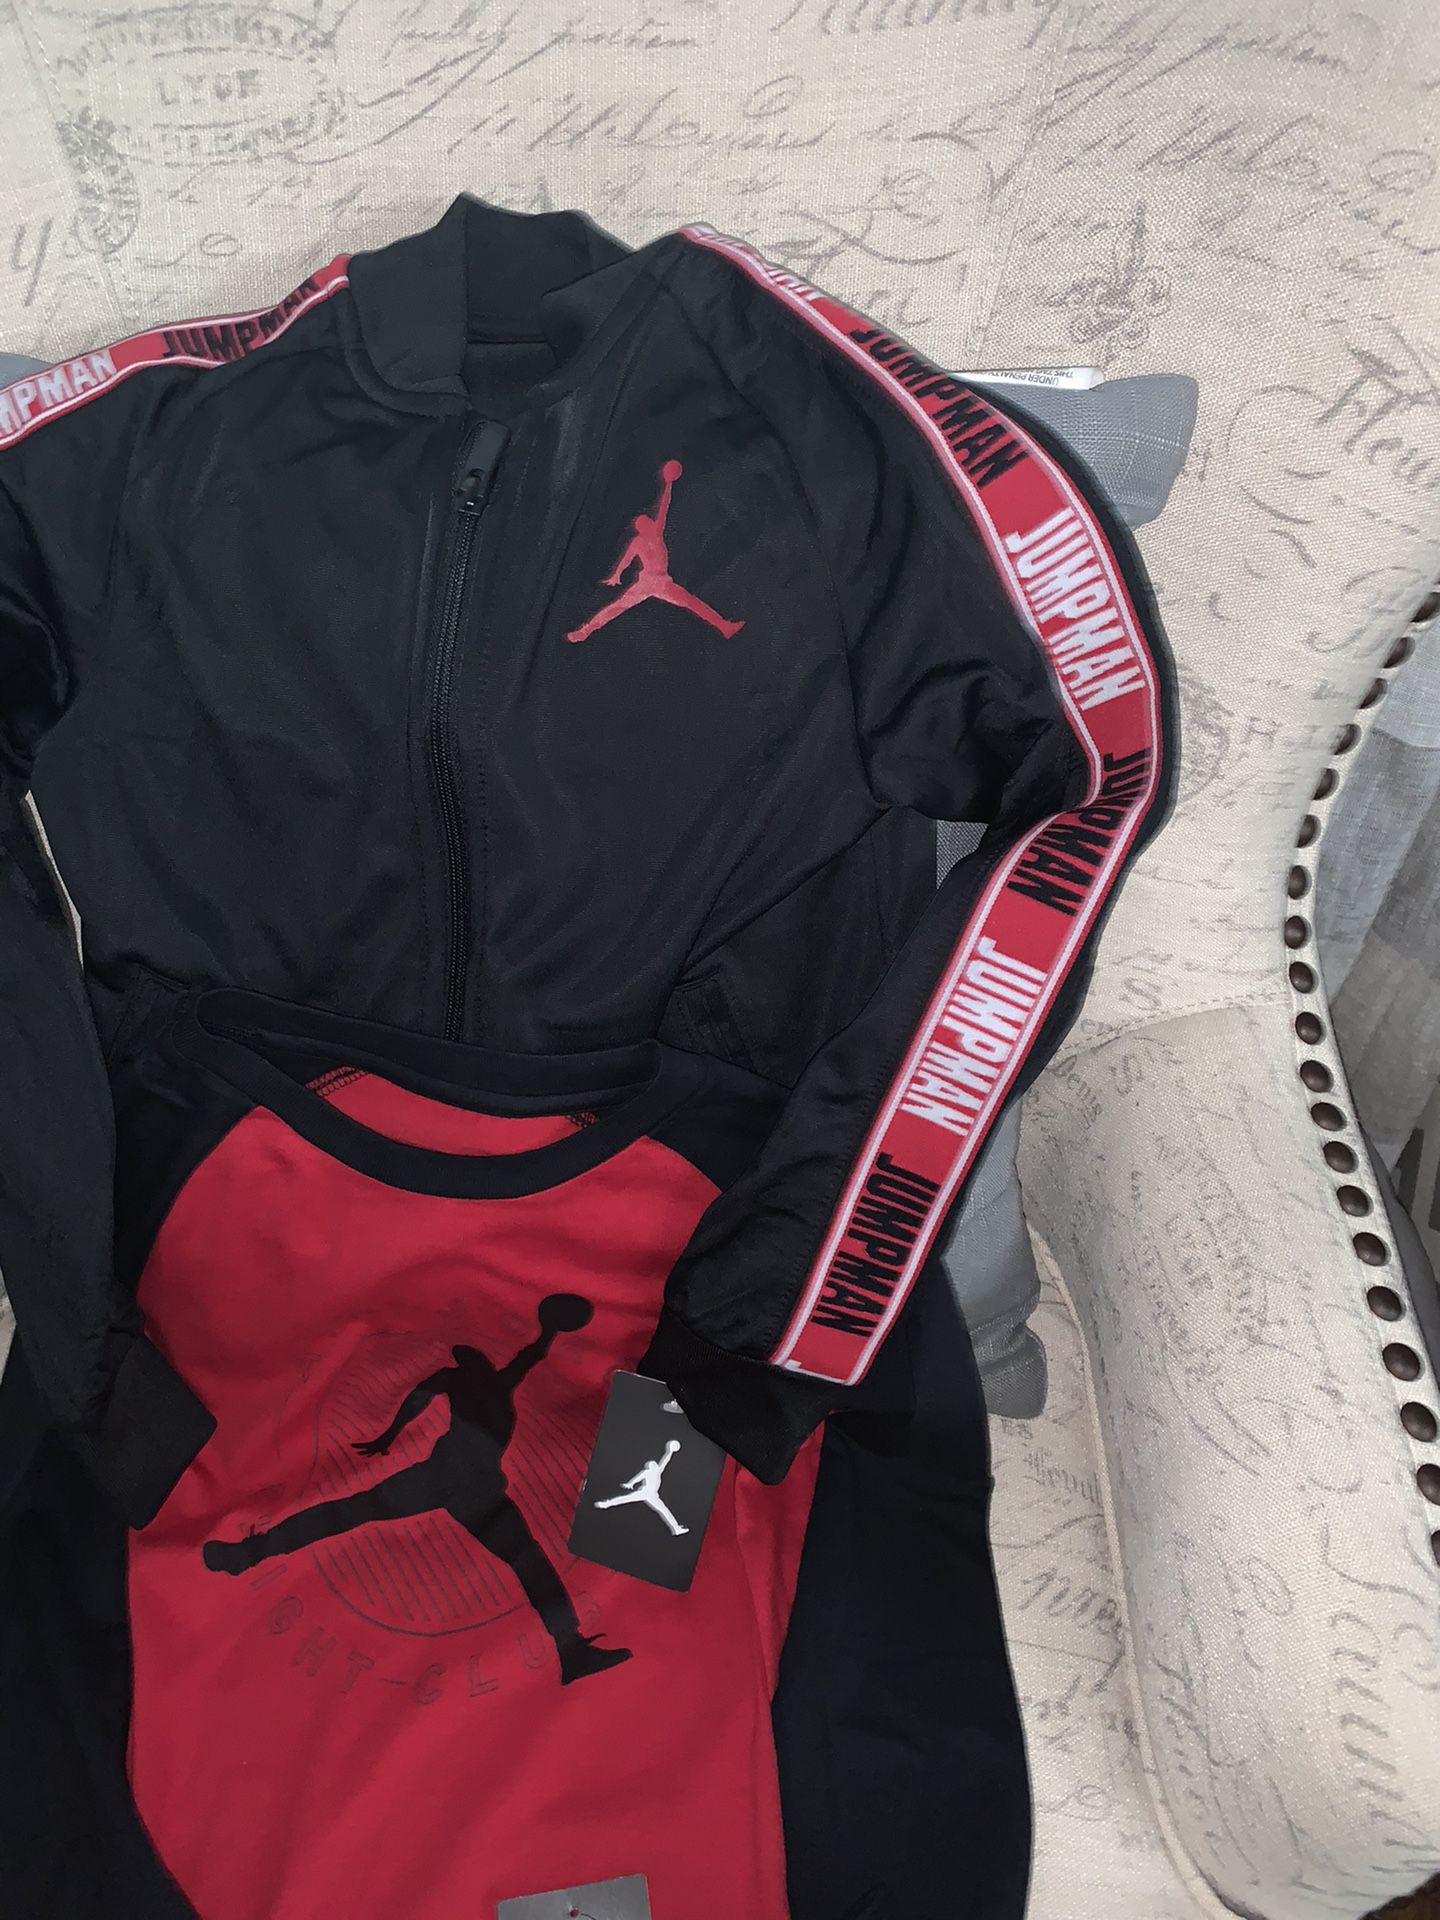 Brand new Jordan jumpman track jacket size youth small with long sleeve Jordan’s shirt size youth small. New with tags never worn